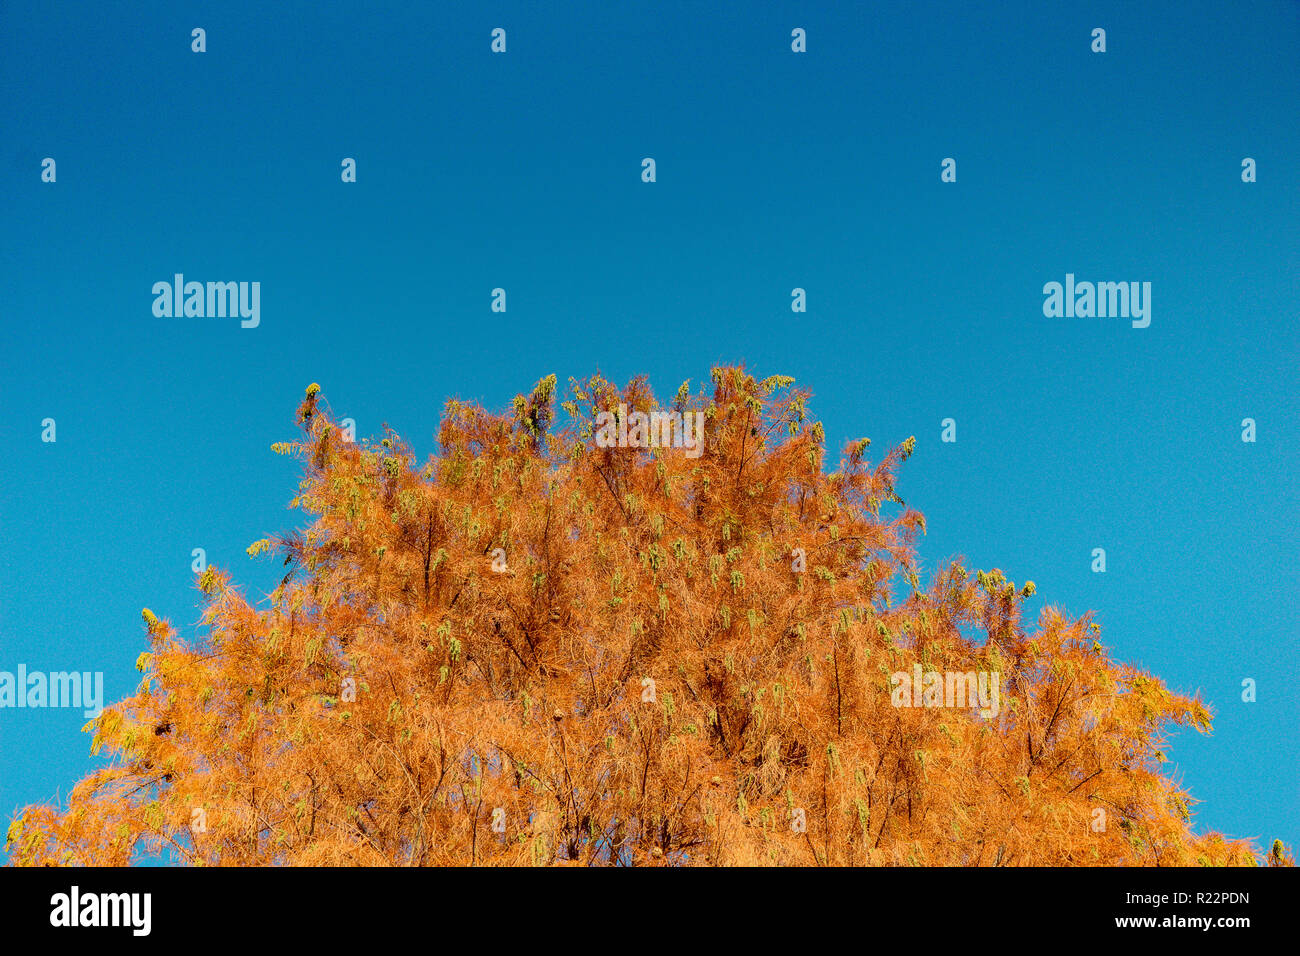 Top part of tree leaves with branches with sky view Stock Photo